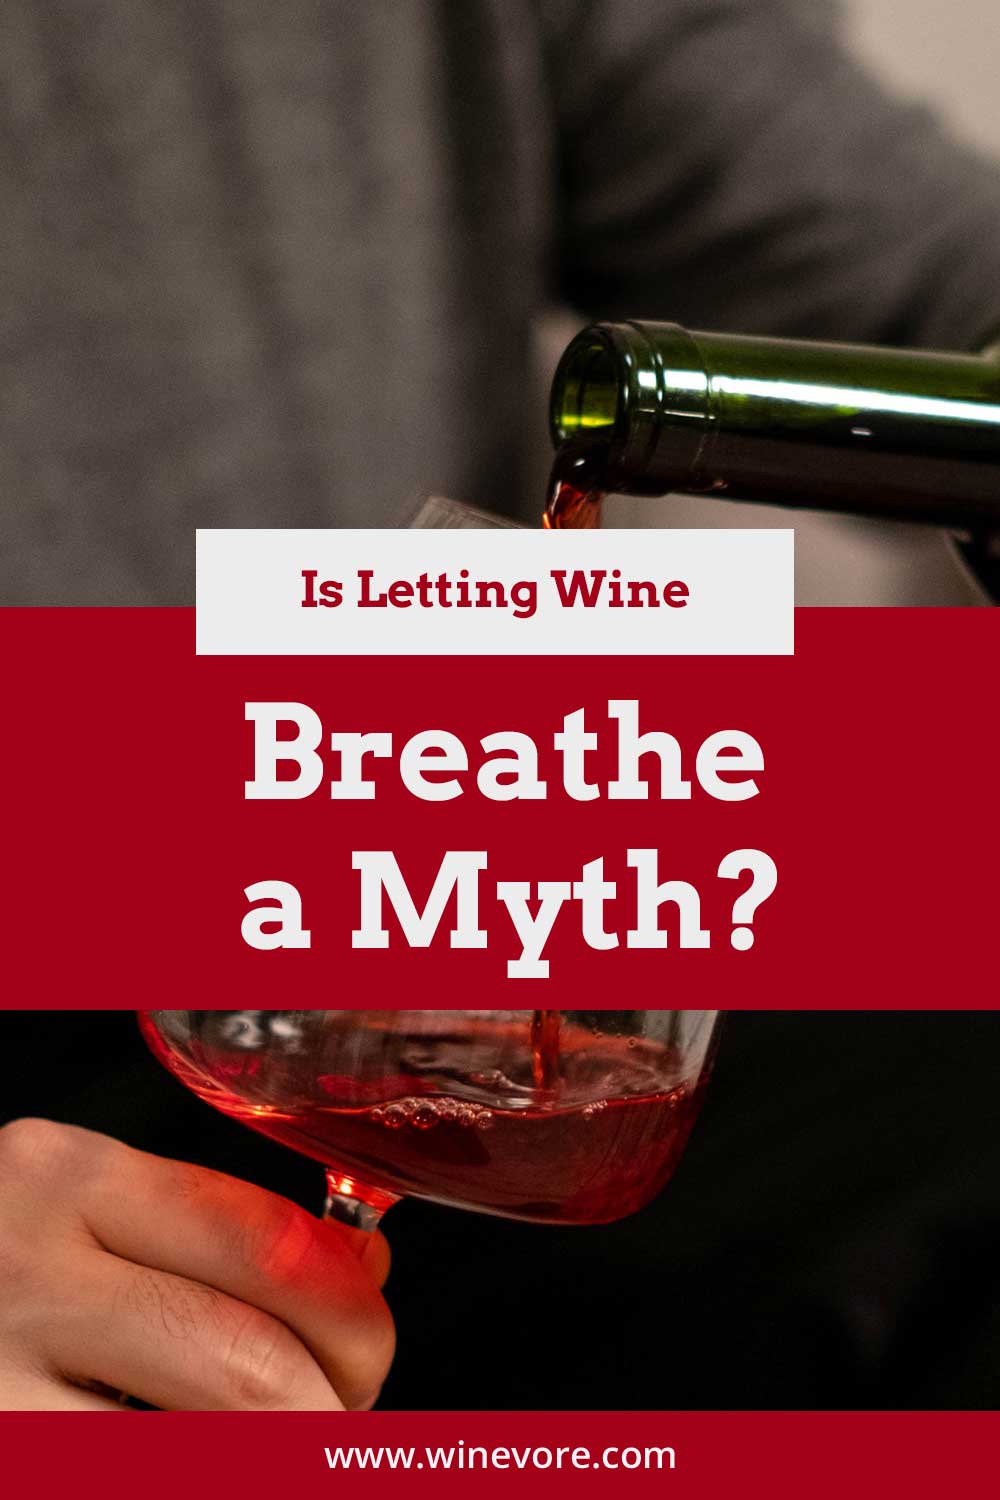 Pouring wine from a green bottle - Is Letting Wine Breathe a Myth?